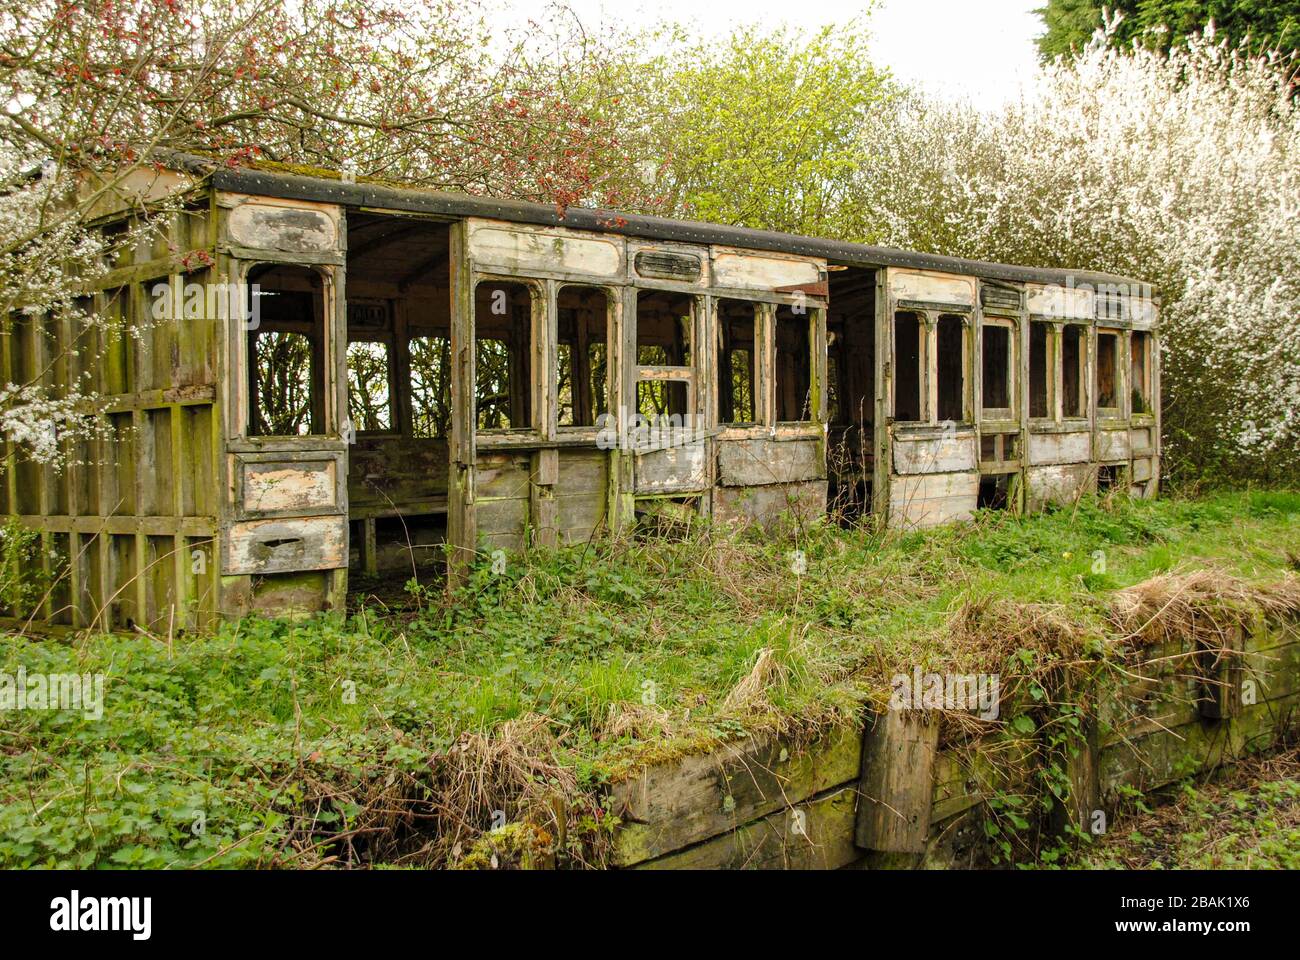 Abandoned Great Eastern Railway carriage built 1883 decommisioned 1911 and used as a station waiting room on Saffron Walden branch at Ashdon Stock Photo